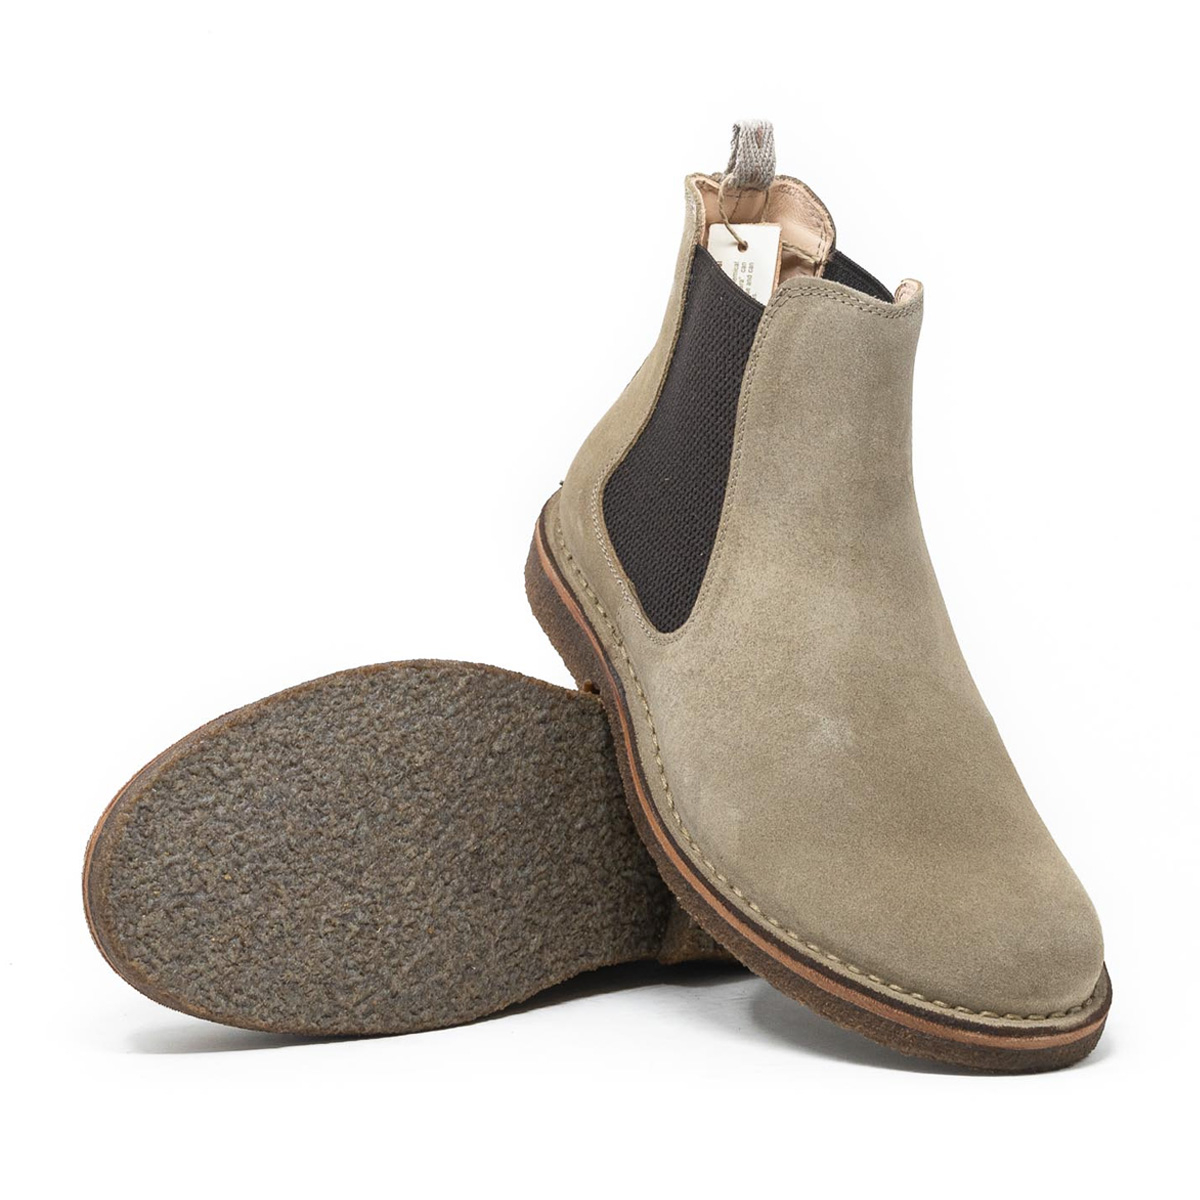 Astorflex Bitflex Chelsea Boot Stone, a timeless classic and a must-have for modern shoe enthusiasts